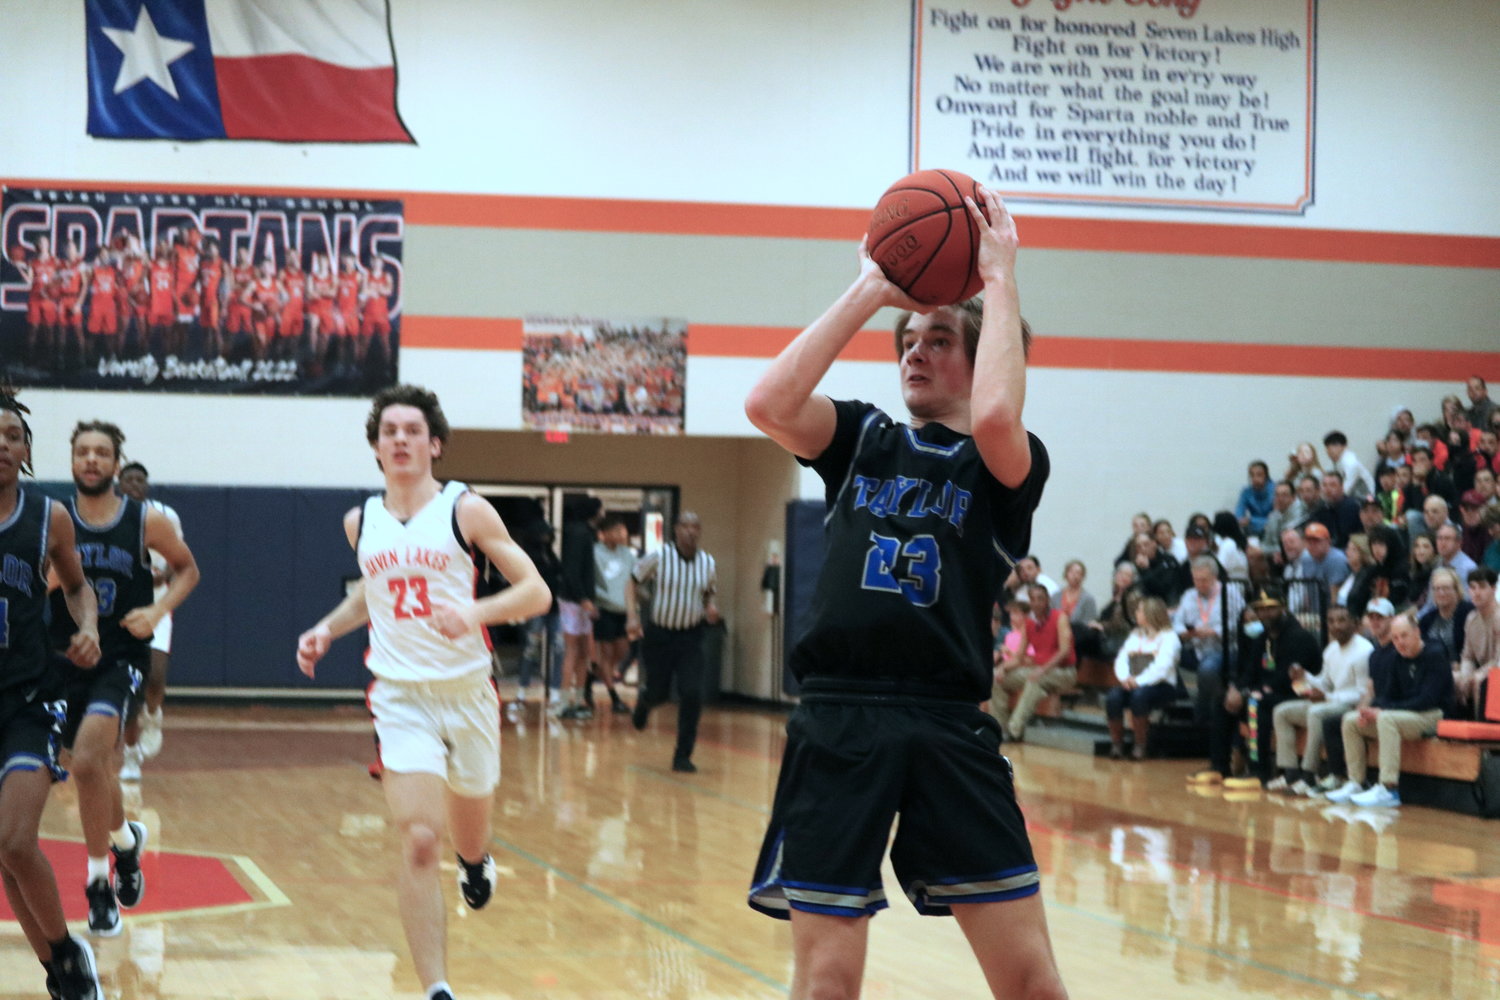 Catch Robbie shoots a jumper during Wednesday’s game between Seven Lakes and Taylor at the Seven Lakes gym.